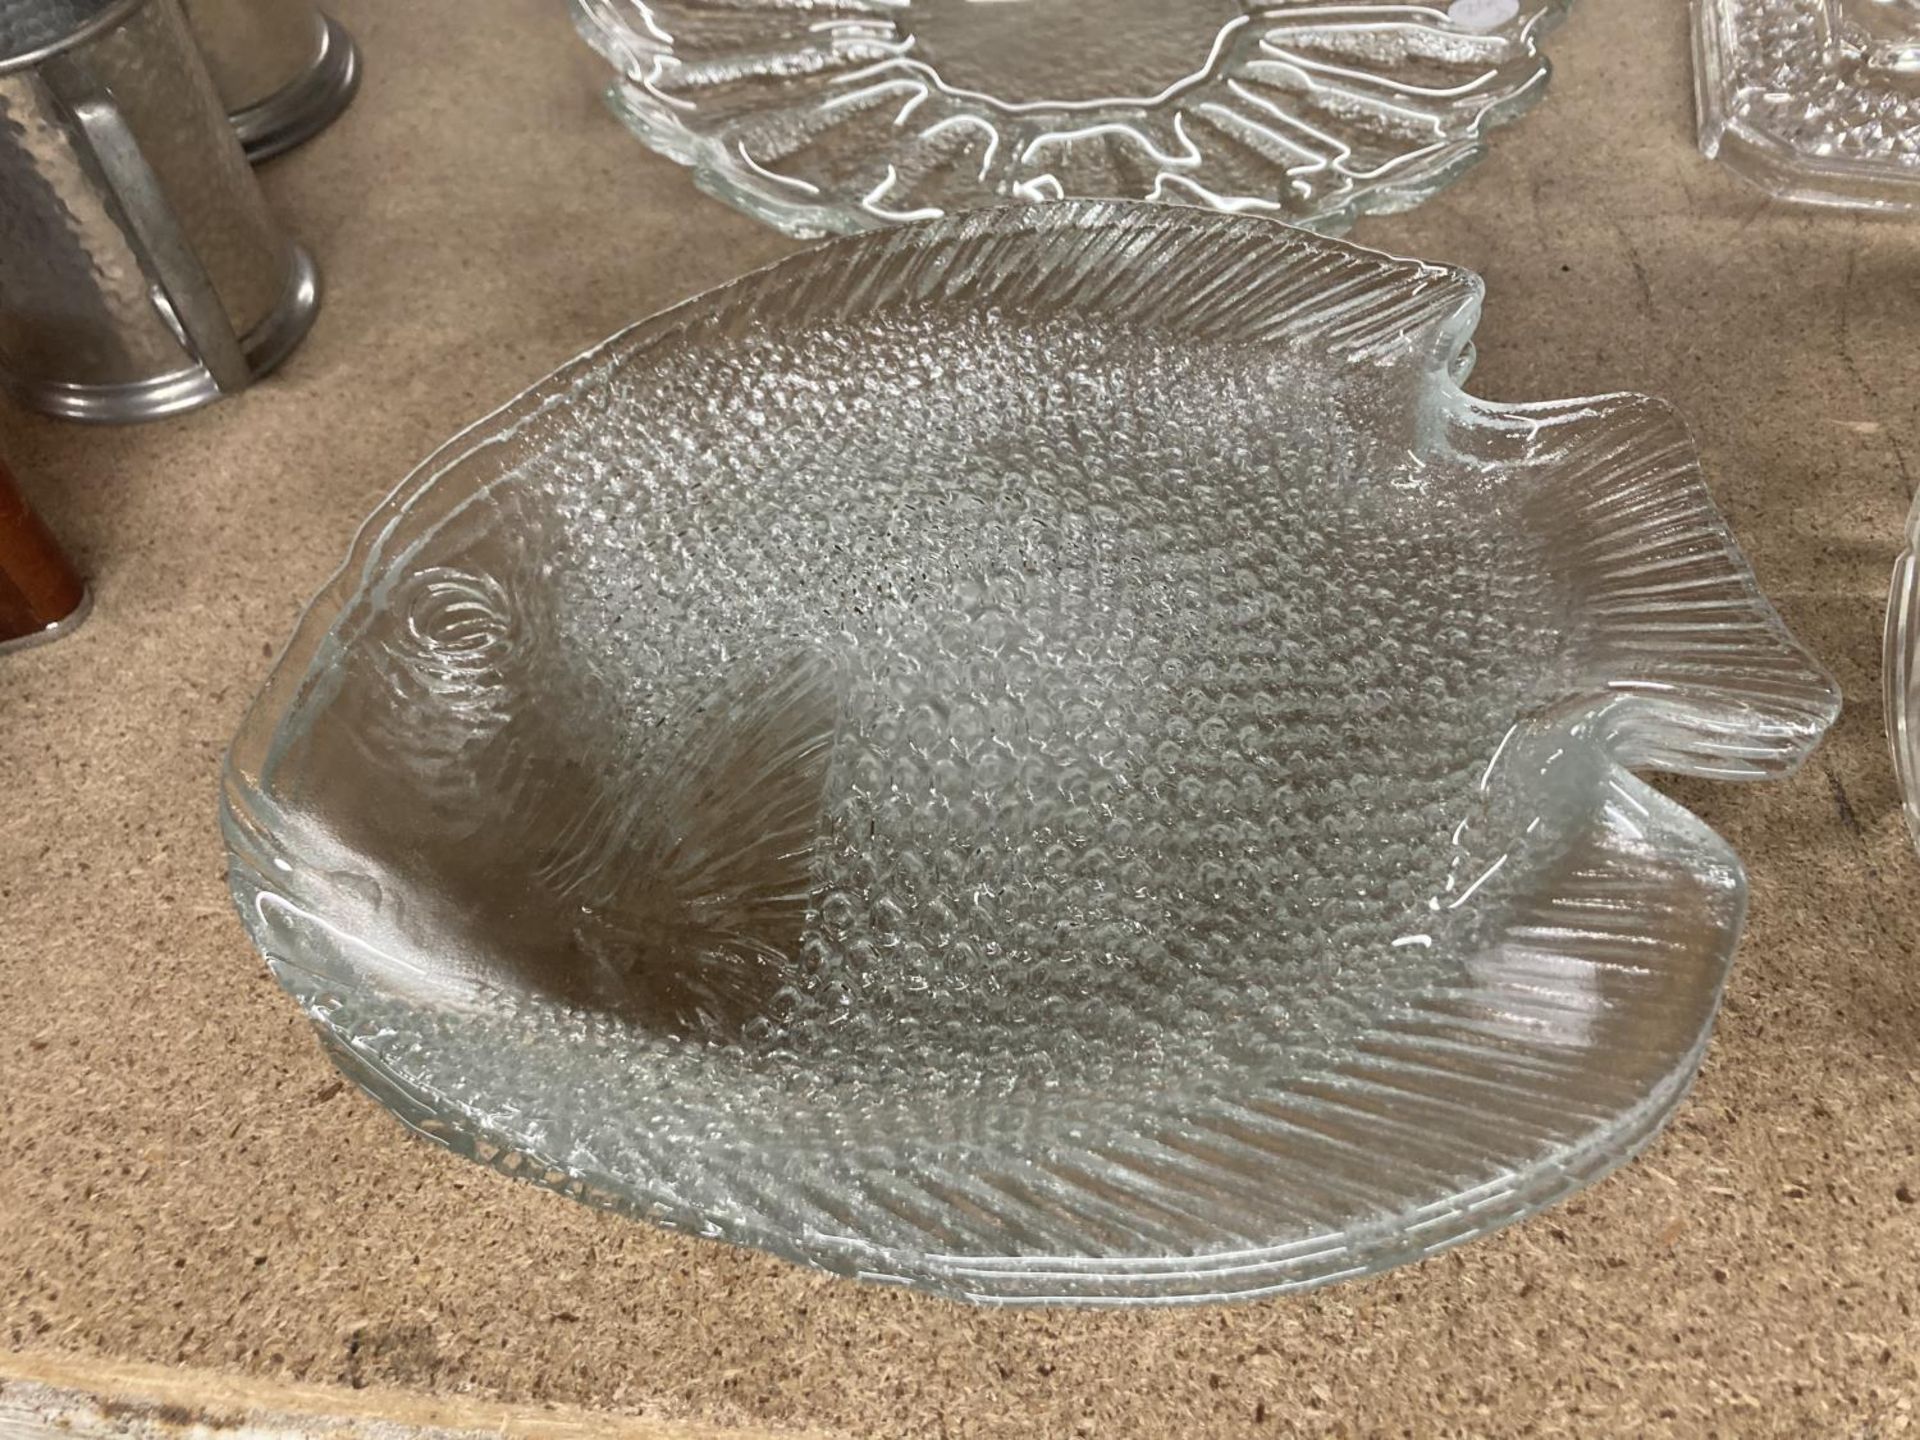 A COLLECTION OF GLASSWARE TO INCLUDE PLATES IN THE SHAPE OF FISHES, BOWL, CAKE STAND, ETC - Image 2 of 5